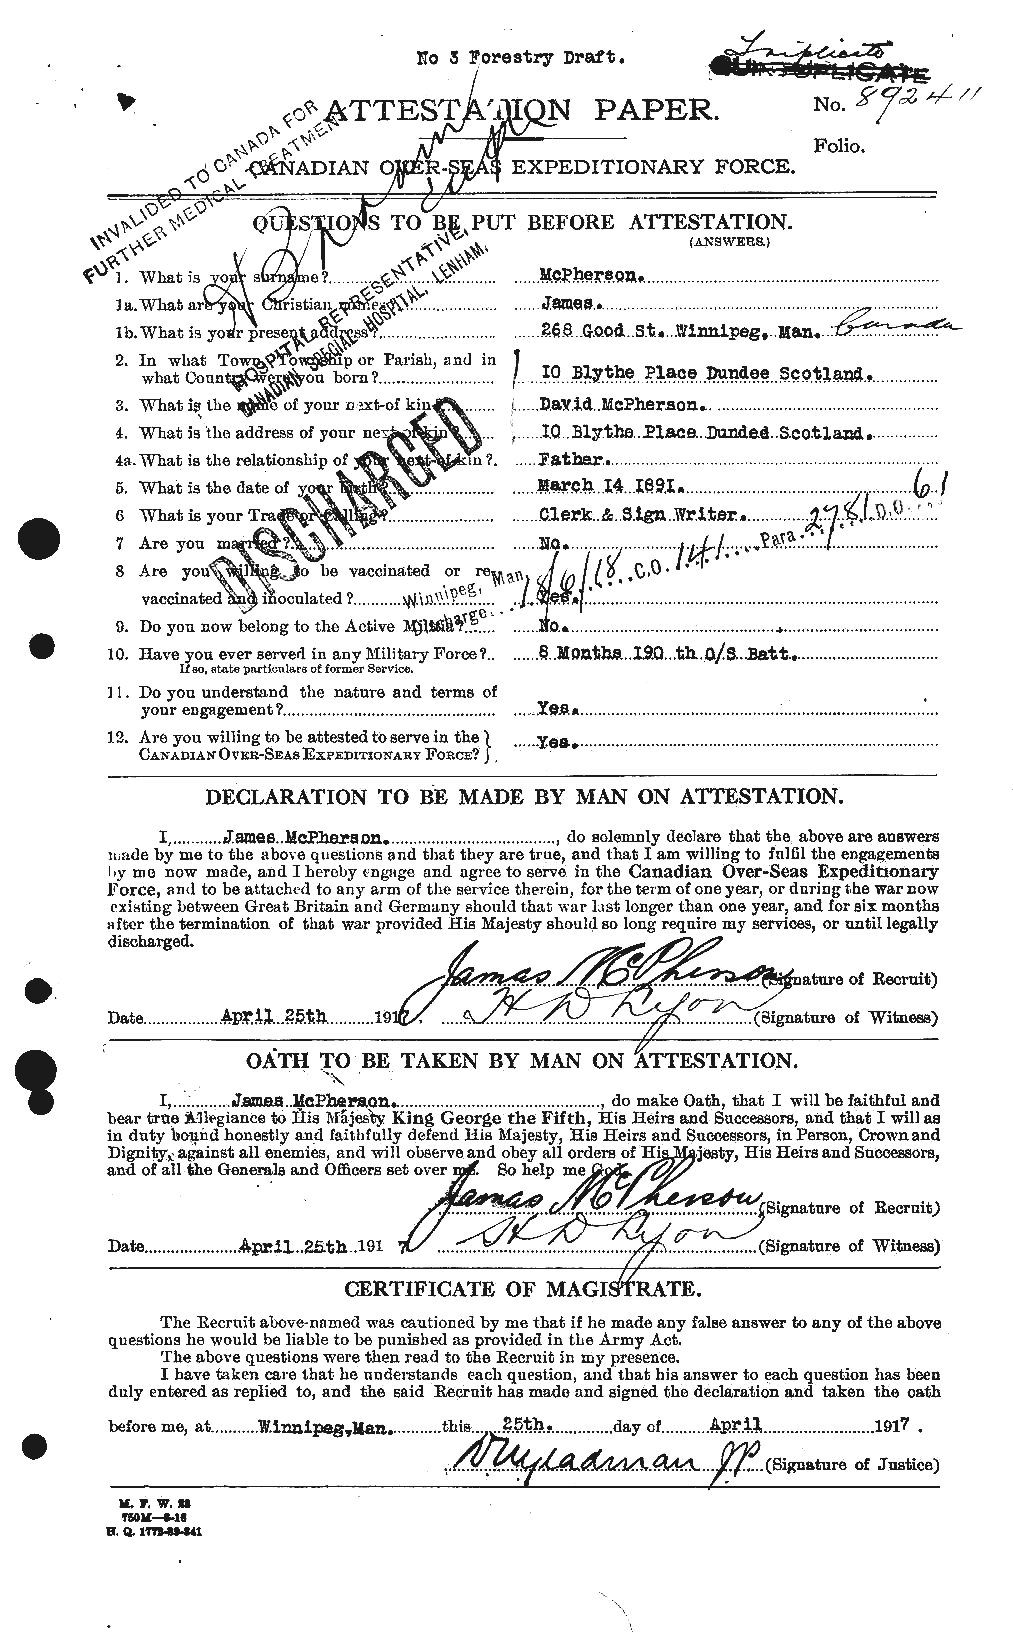 Personnel Records of the First World War - CEF 543069a